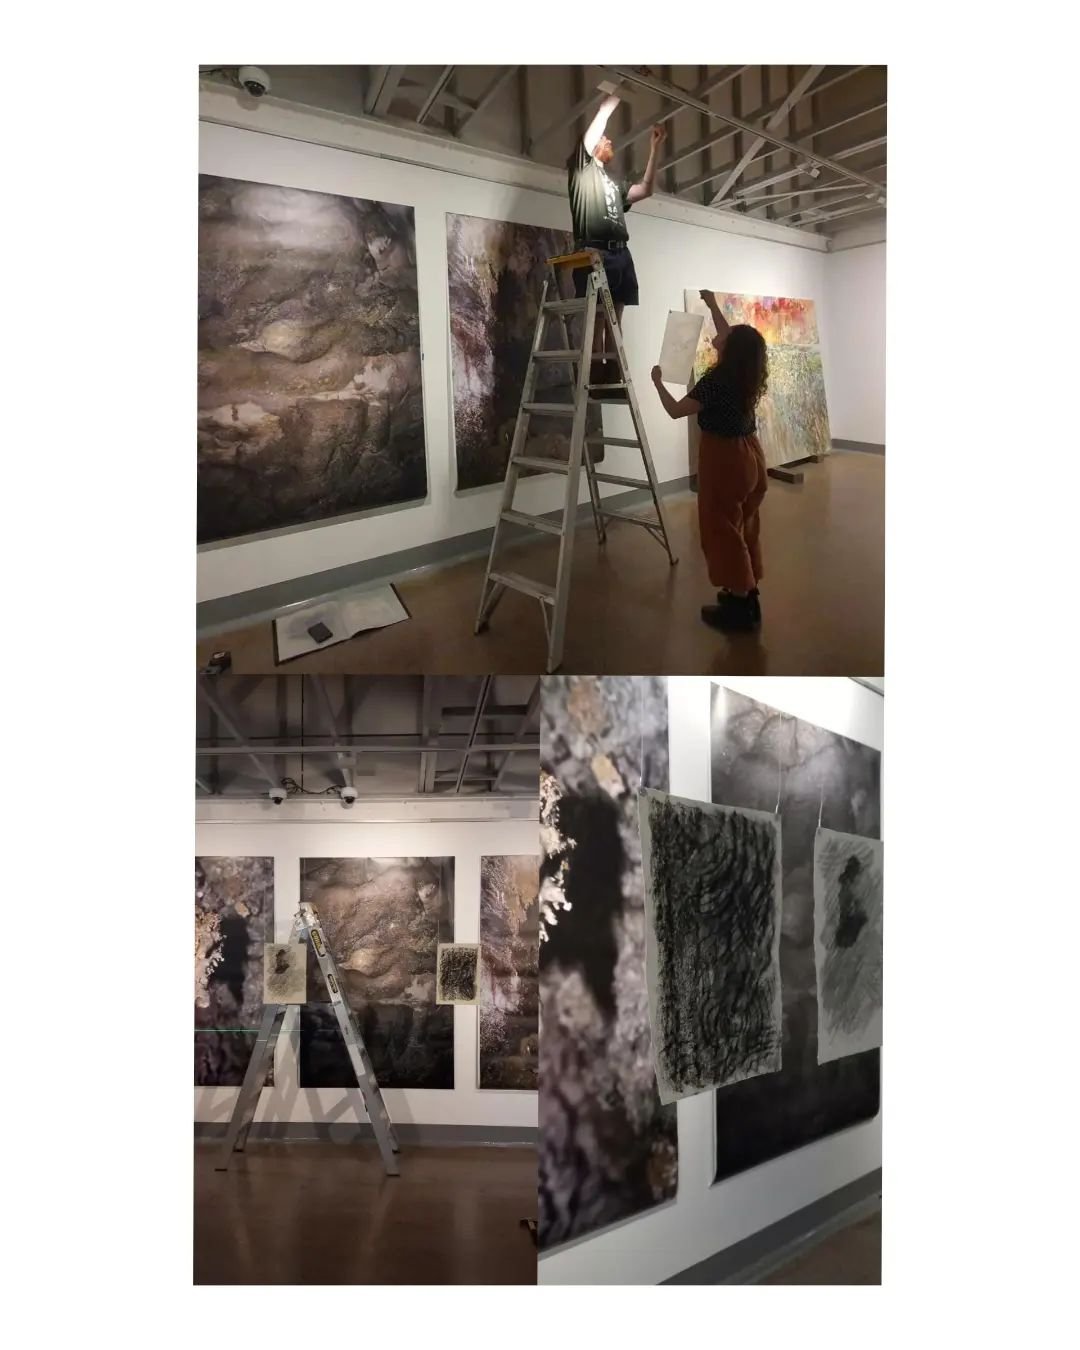 Install of Wellspring for the about-place/ about-face show now on at @caloundraregionalgallery - thanks to everyone who made it to the opening, what a night! And a big shout out to all who made this possible. It is strange to imagine the cave, landfo